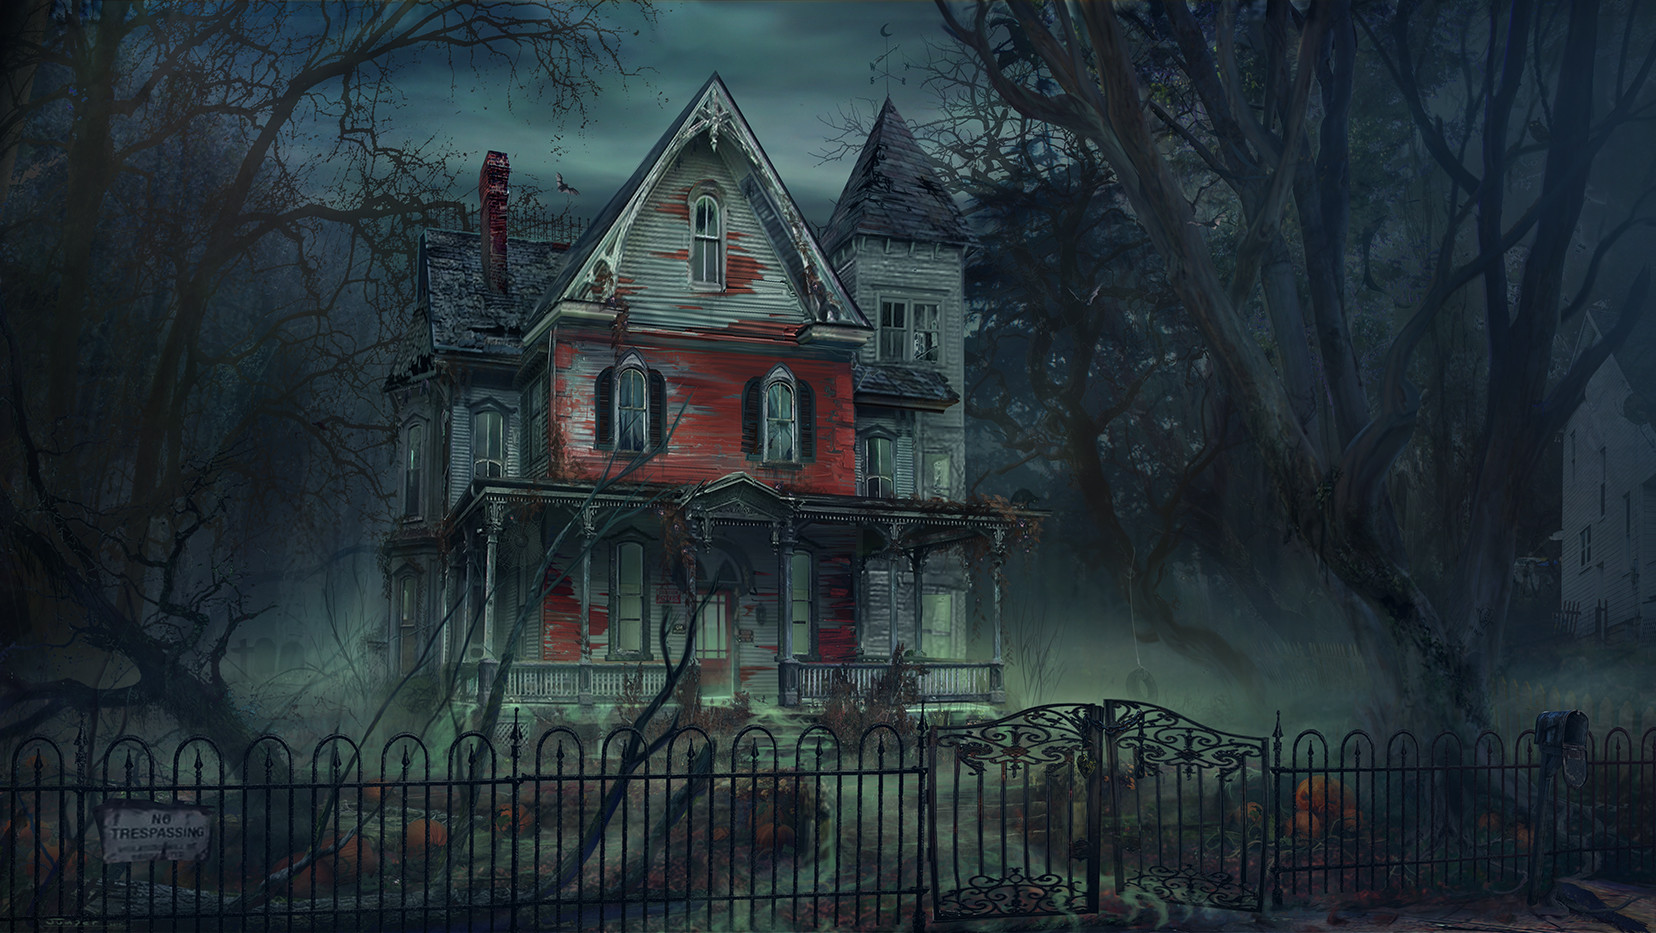 A Haunted House - Night and Day by Jeff Jumper at ArtStation